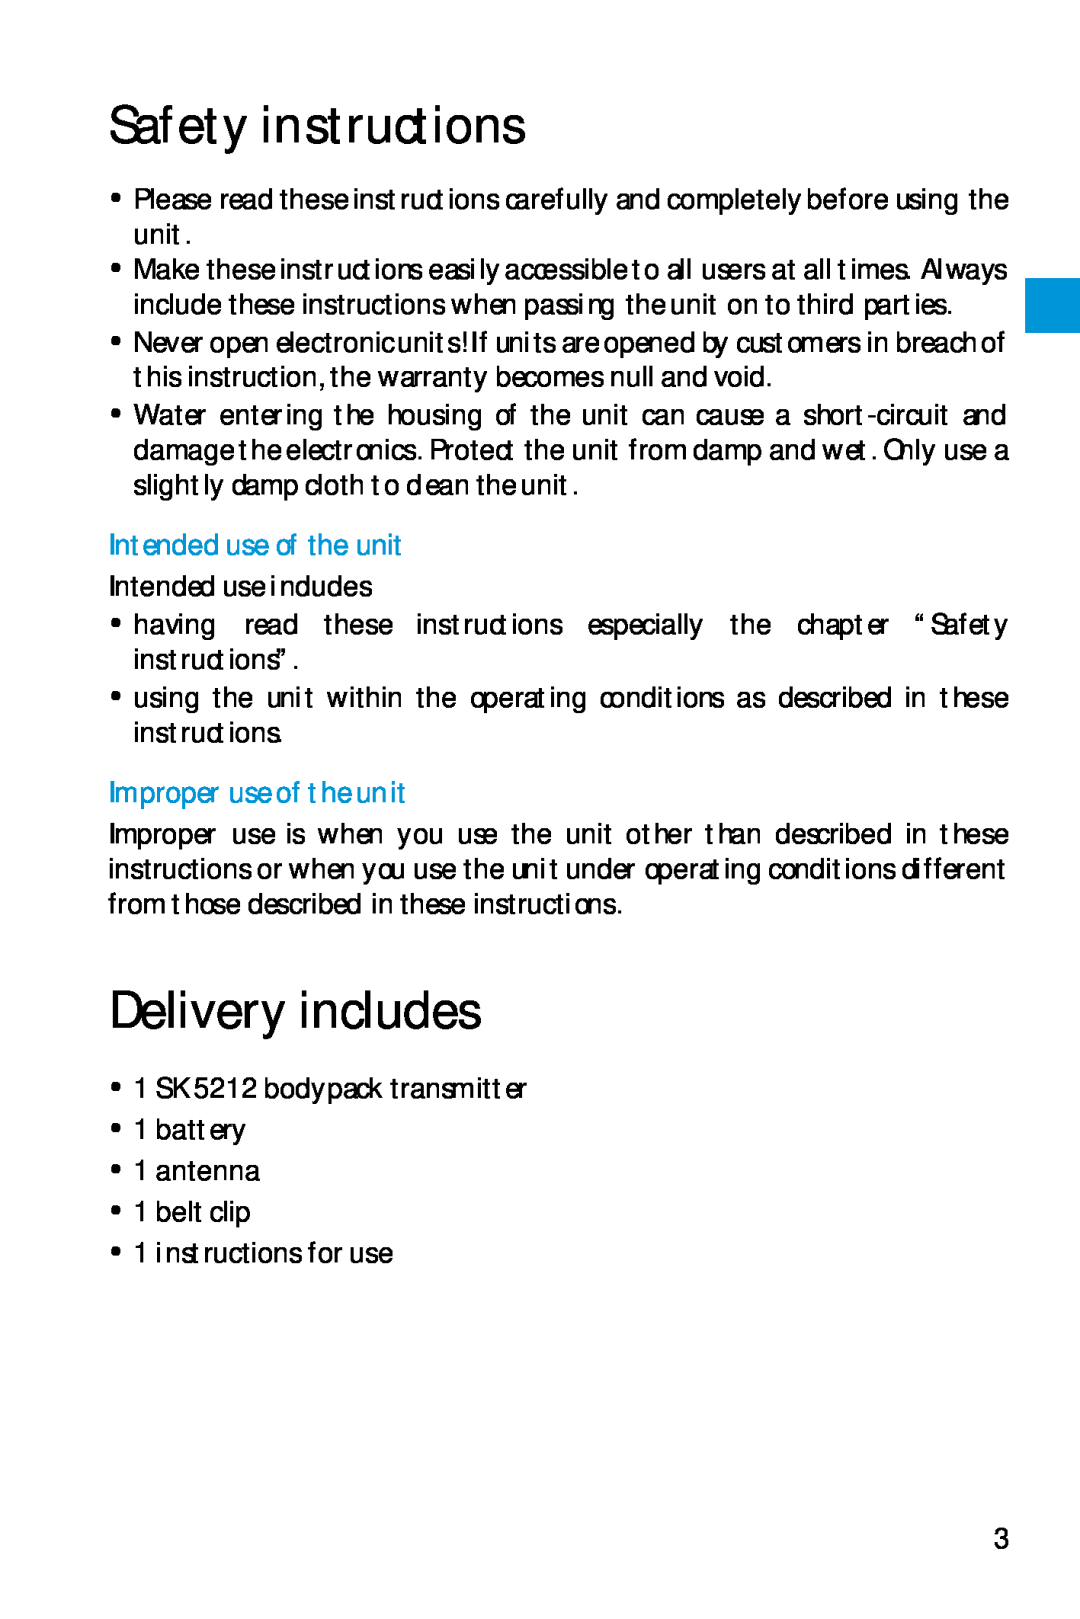 Sennheiser SK 5212 manual Safety instructions, Delivery includes 